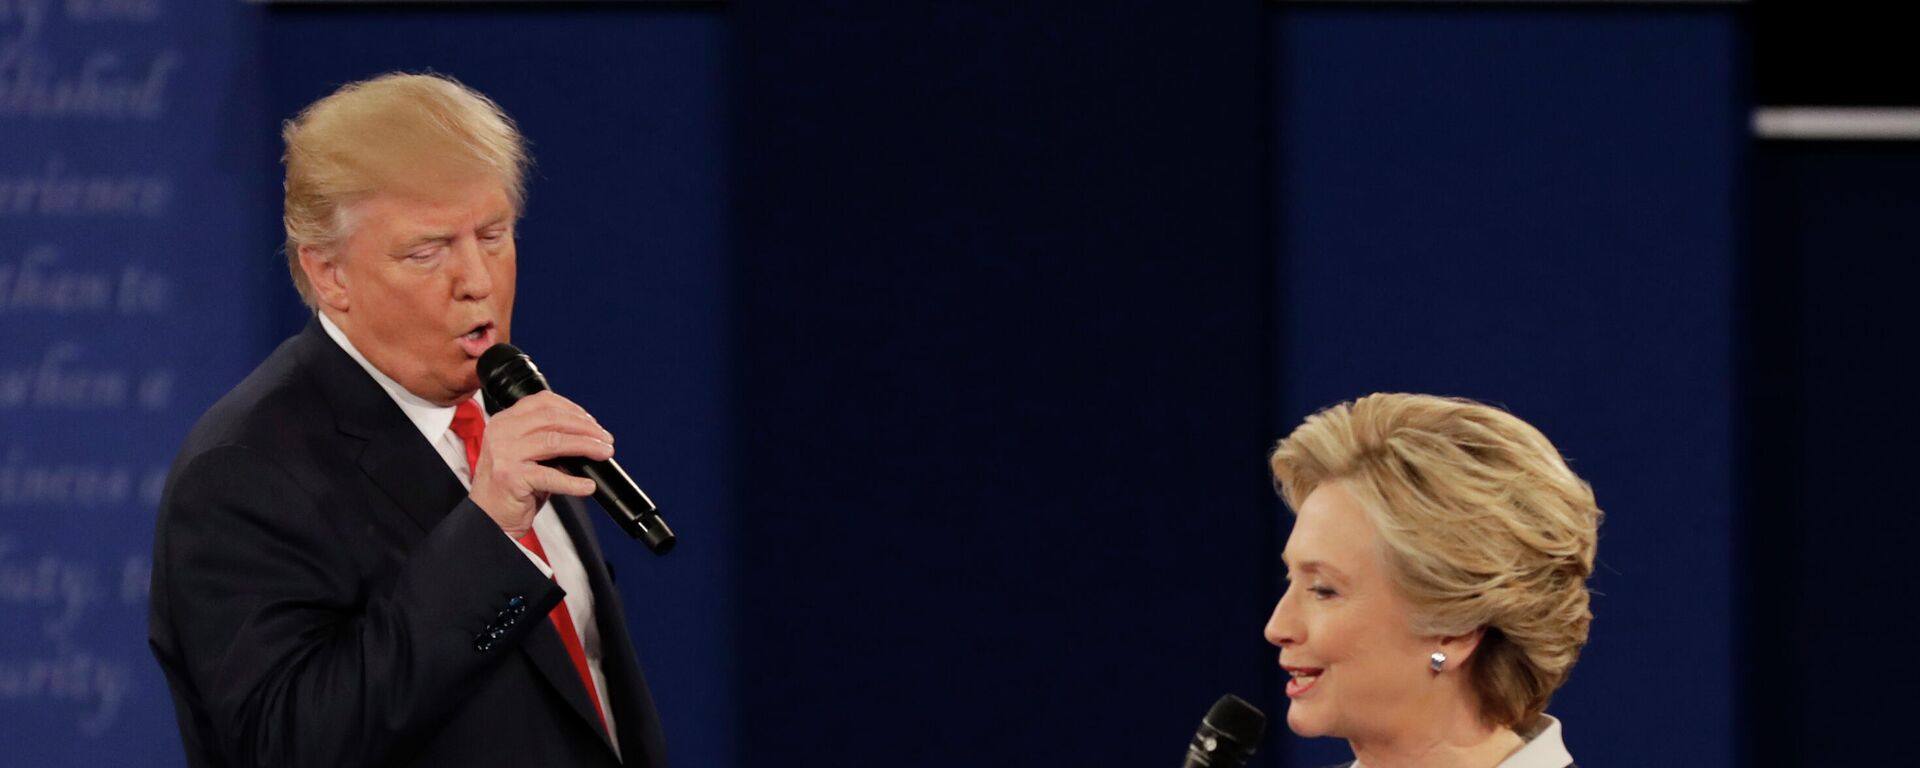 In this Oct. 9, 2016, file photo Republican presidential nominee Donald Trump and Democratic presidential nominee Hillary Clinton speak during the second presidential debate at Washington University in St. Louis. - Sputnik International, 1920, 17.01.2022